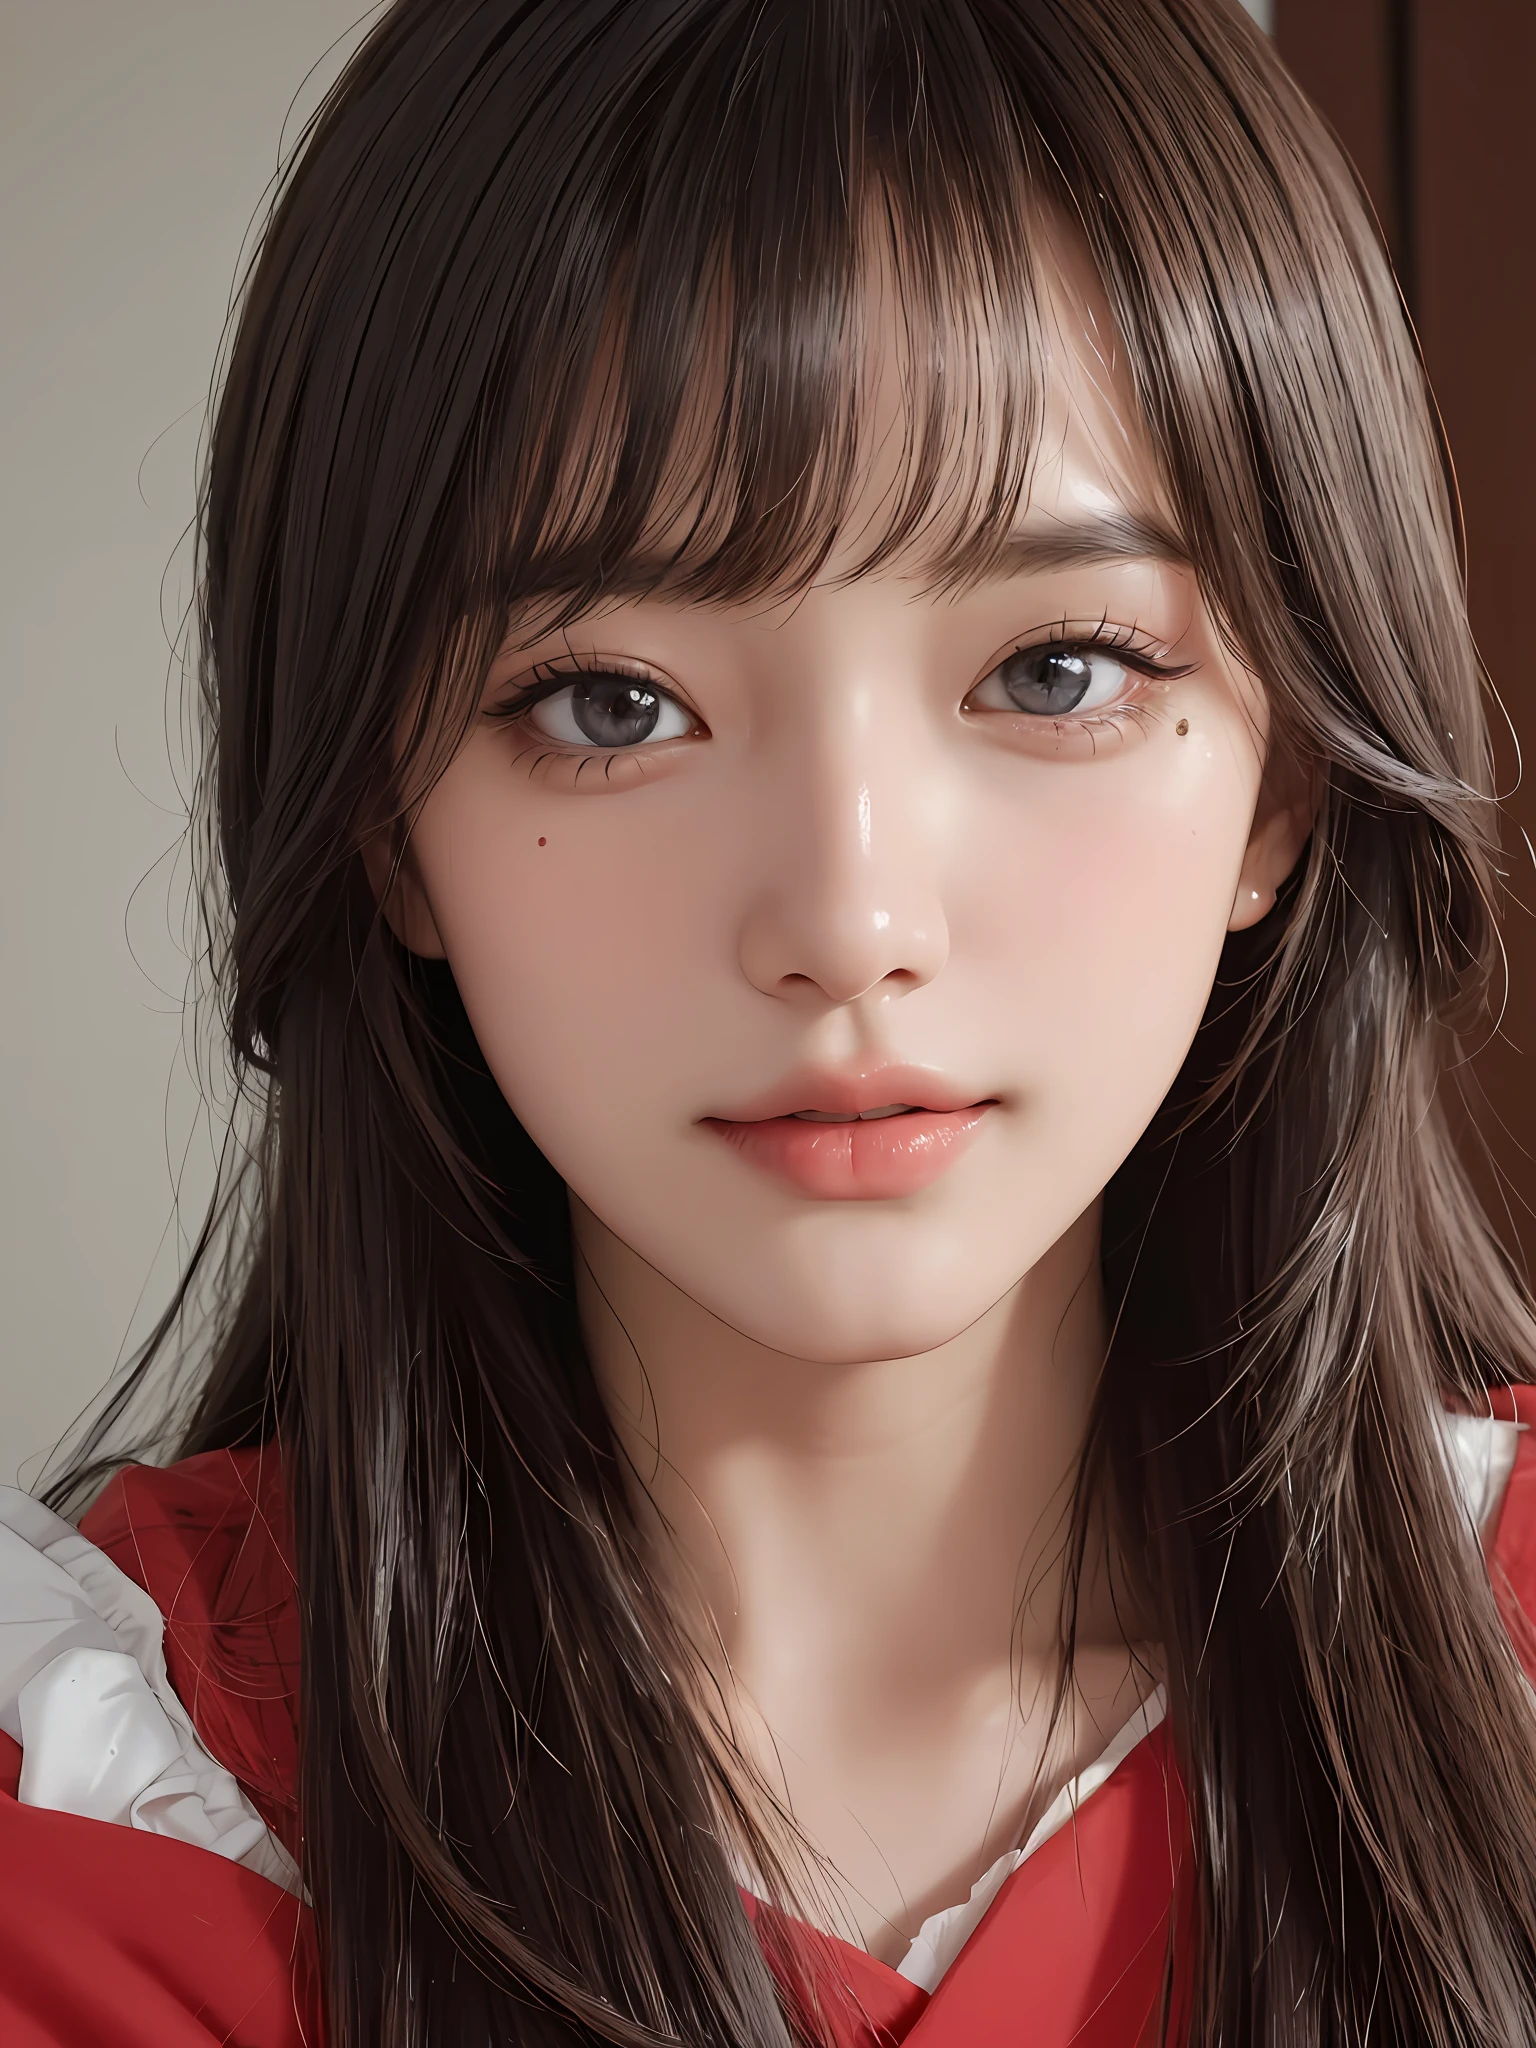 masterpiece, best picture quality, high quality, beautiful girl, Japanese, Japanese school girl, popular Korean makeup, detailed, swollen eyes, detailed eyes, detailed skin, beautiful skin, ultra high resolution, (reality: 1.4), very beautiful, slightly younger face, beautiful skin, slender, (ultra realistic), (illustration), (high resolution), (8K), (highly detailed), (best illustration), (beautifully detailed eyes), (super detailed), (wallpaper), (detailed face), looking at viewer, fine details, detailed face, pureerosfaceace_v1, smiling, looking straight ahead, looking straight ahead, angle from waist up, realistic photo, bright lighting, professional lighting, blonde, long hair, dark ruins, big red moon, gorgeous red and black dress, mature woman, long stylish bangs,キスショット・アセロラオリオン・ハートアンダーブレード